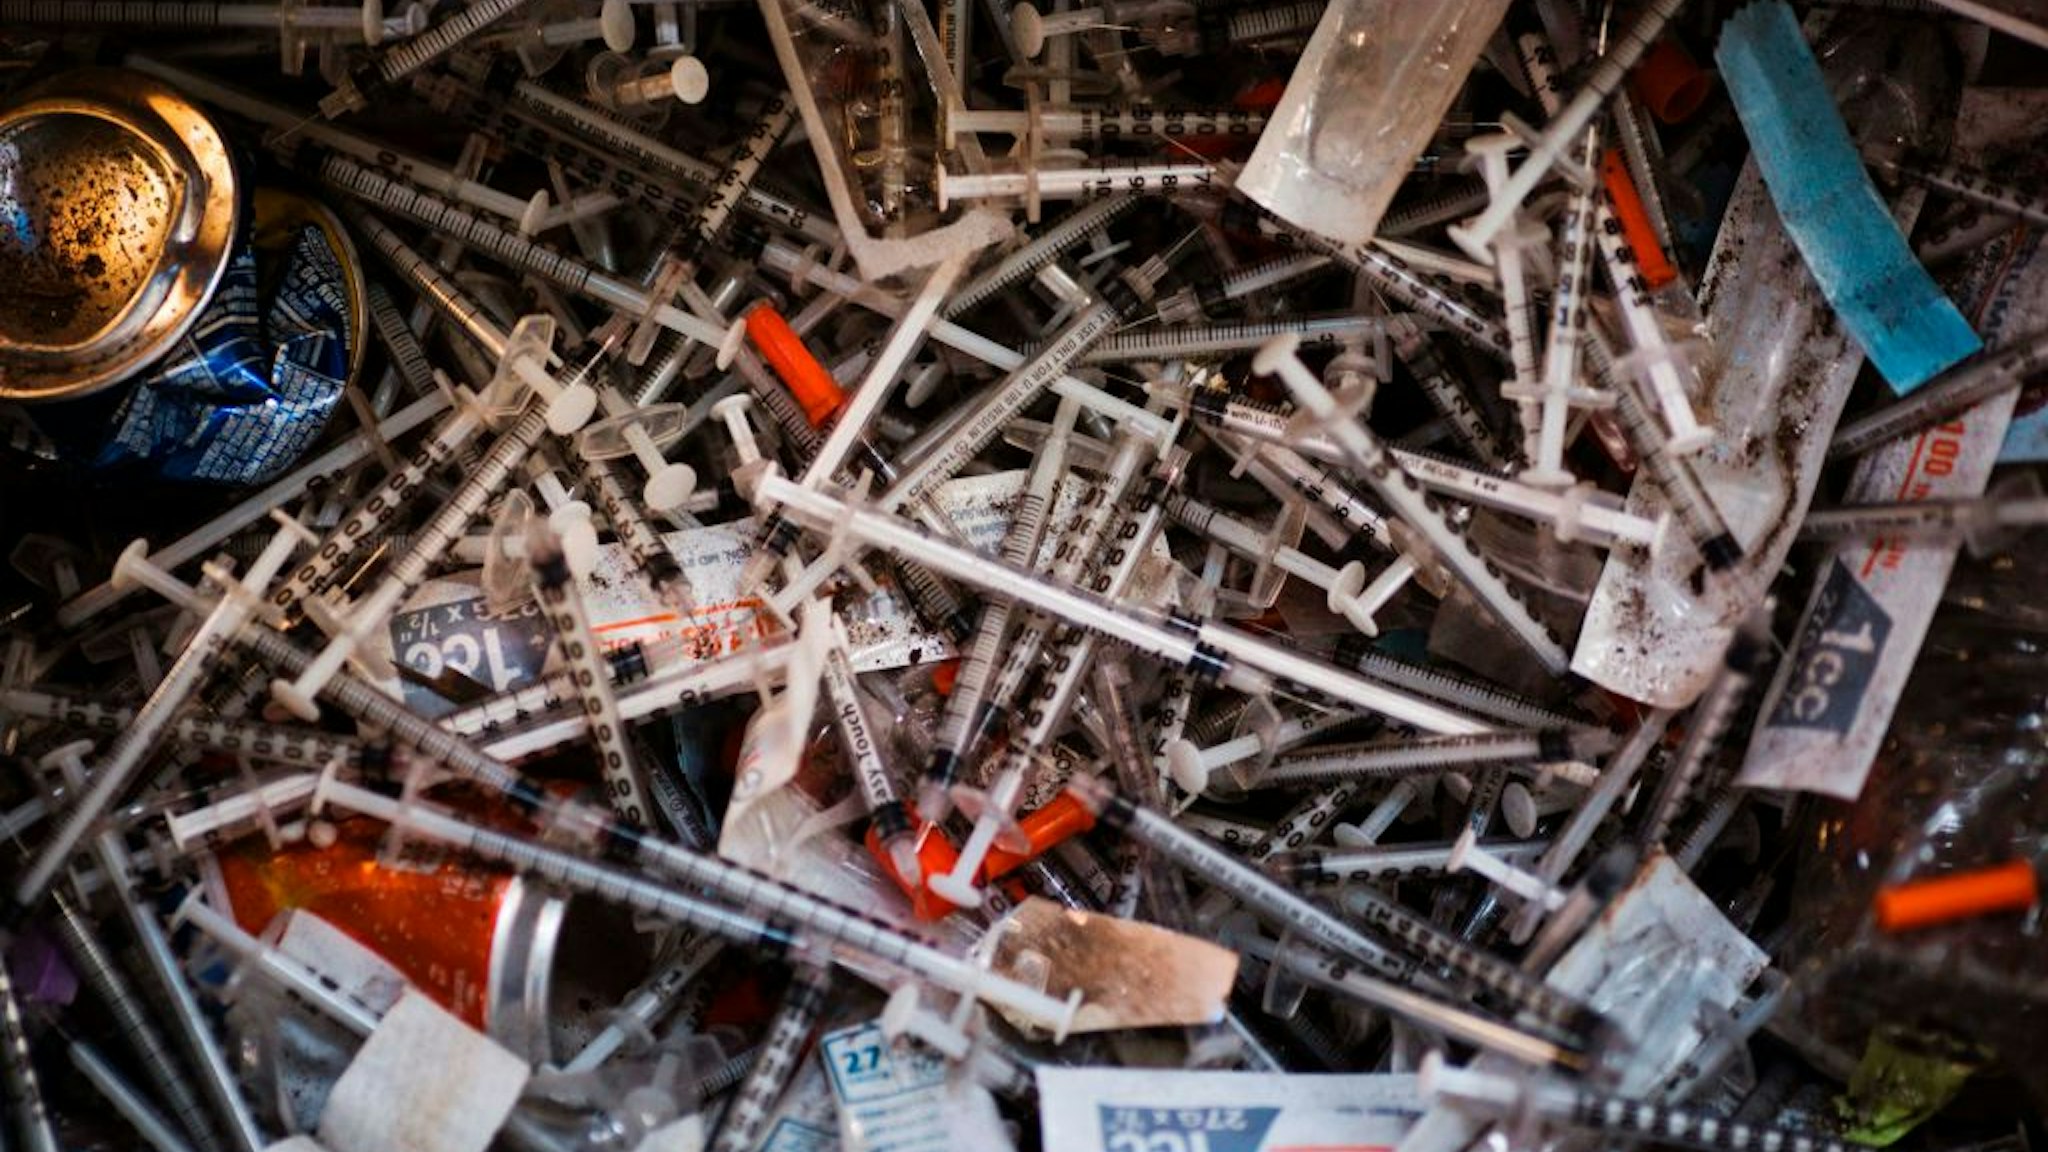 Discarded needles are seen at a heroin encampment in the Kensington neighborhood of Philadelphia, Pennsylvania, on April 7, 2017. In North Philadelphia, railroad gulch as it is knowen, is ground zero in Philadelphia?s opioid epidemic. Known by locals as El Campanento, the open air drug market and heroin encampment is built with the discarded materials from the gulch and populated by addicts seeking a hit of heroin to keep their dope sick, or withdrawal symptoms, at bay. In one area, near the 2nd Avenue overpass, empty syringe wrappers blanket the refuse like grass the used needles they once contained poking through like thistles. / AFP PHOTO / DOMINICK REUTER (Photo credit should read DOMINICK REUTER/AFP via Getty Images)